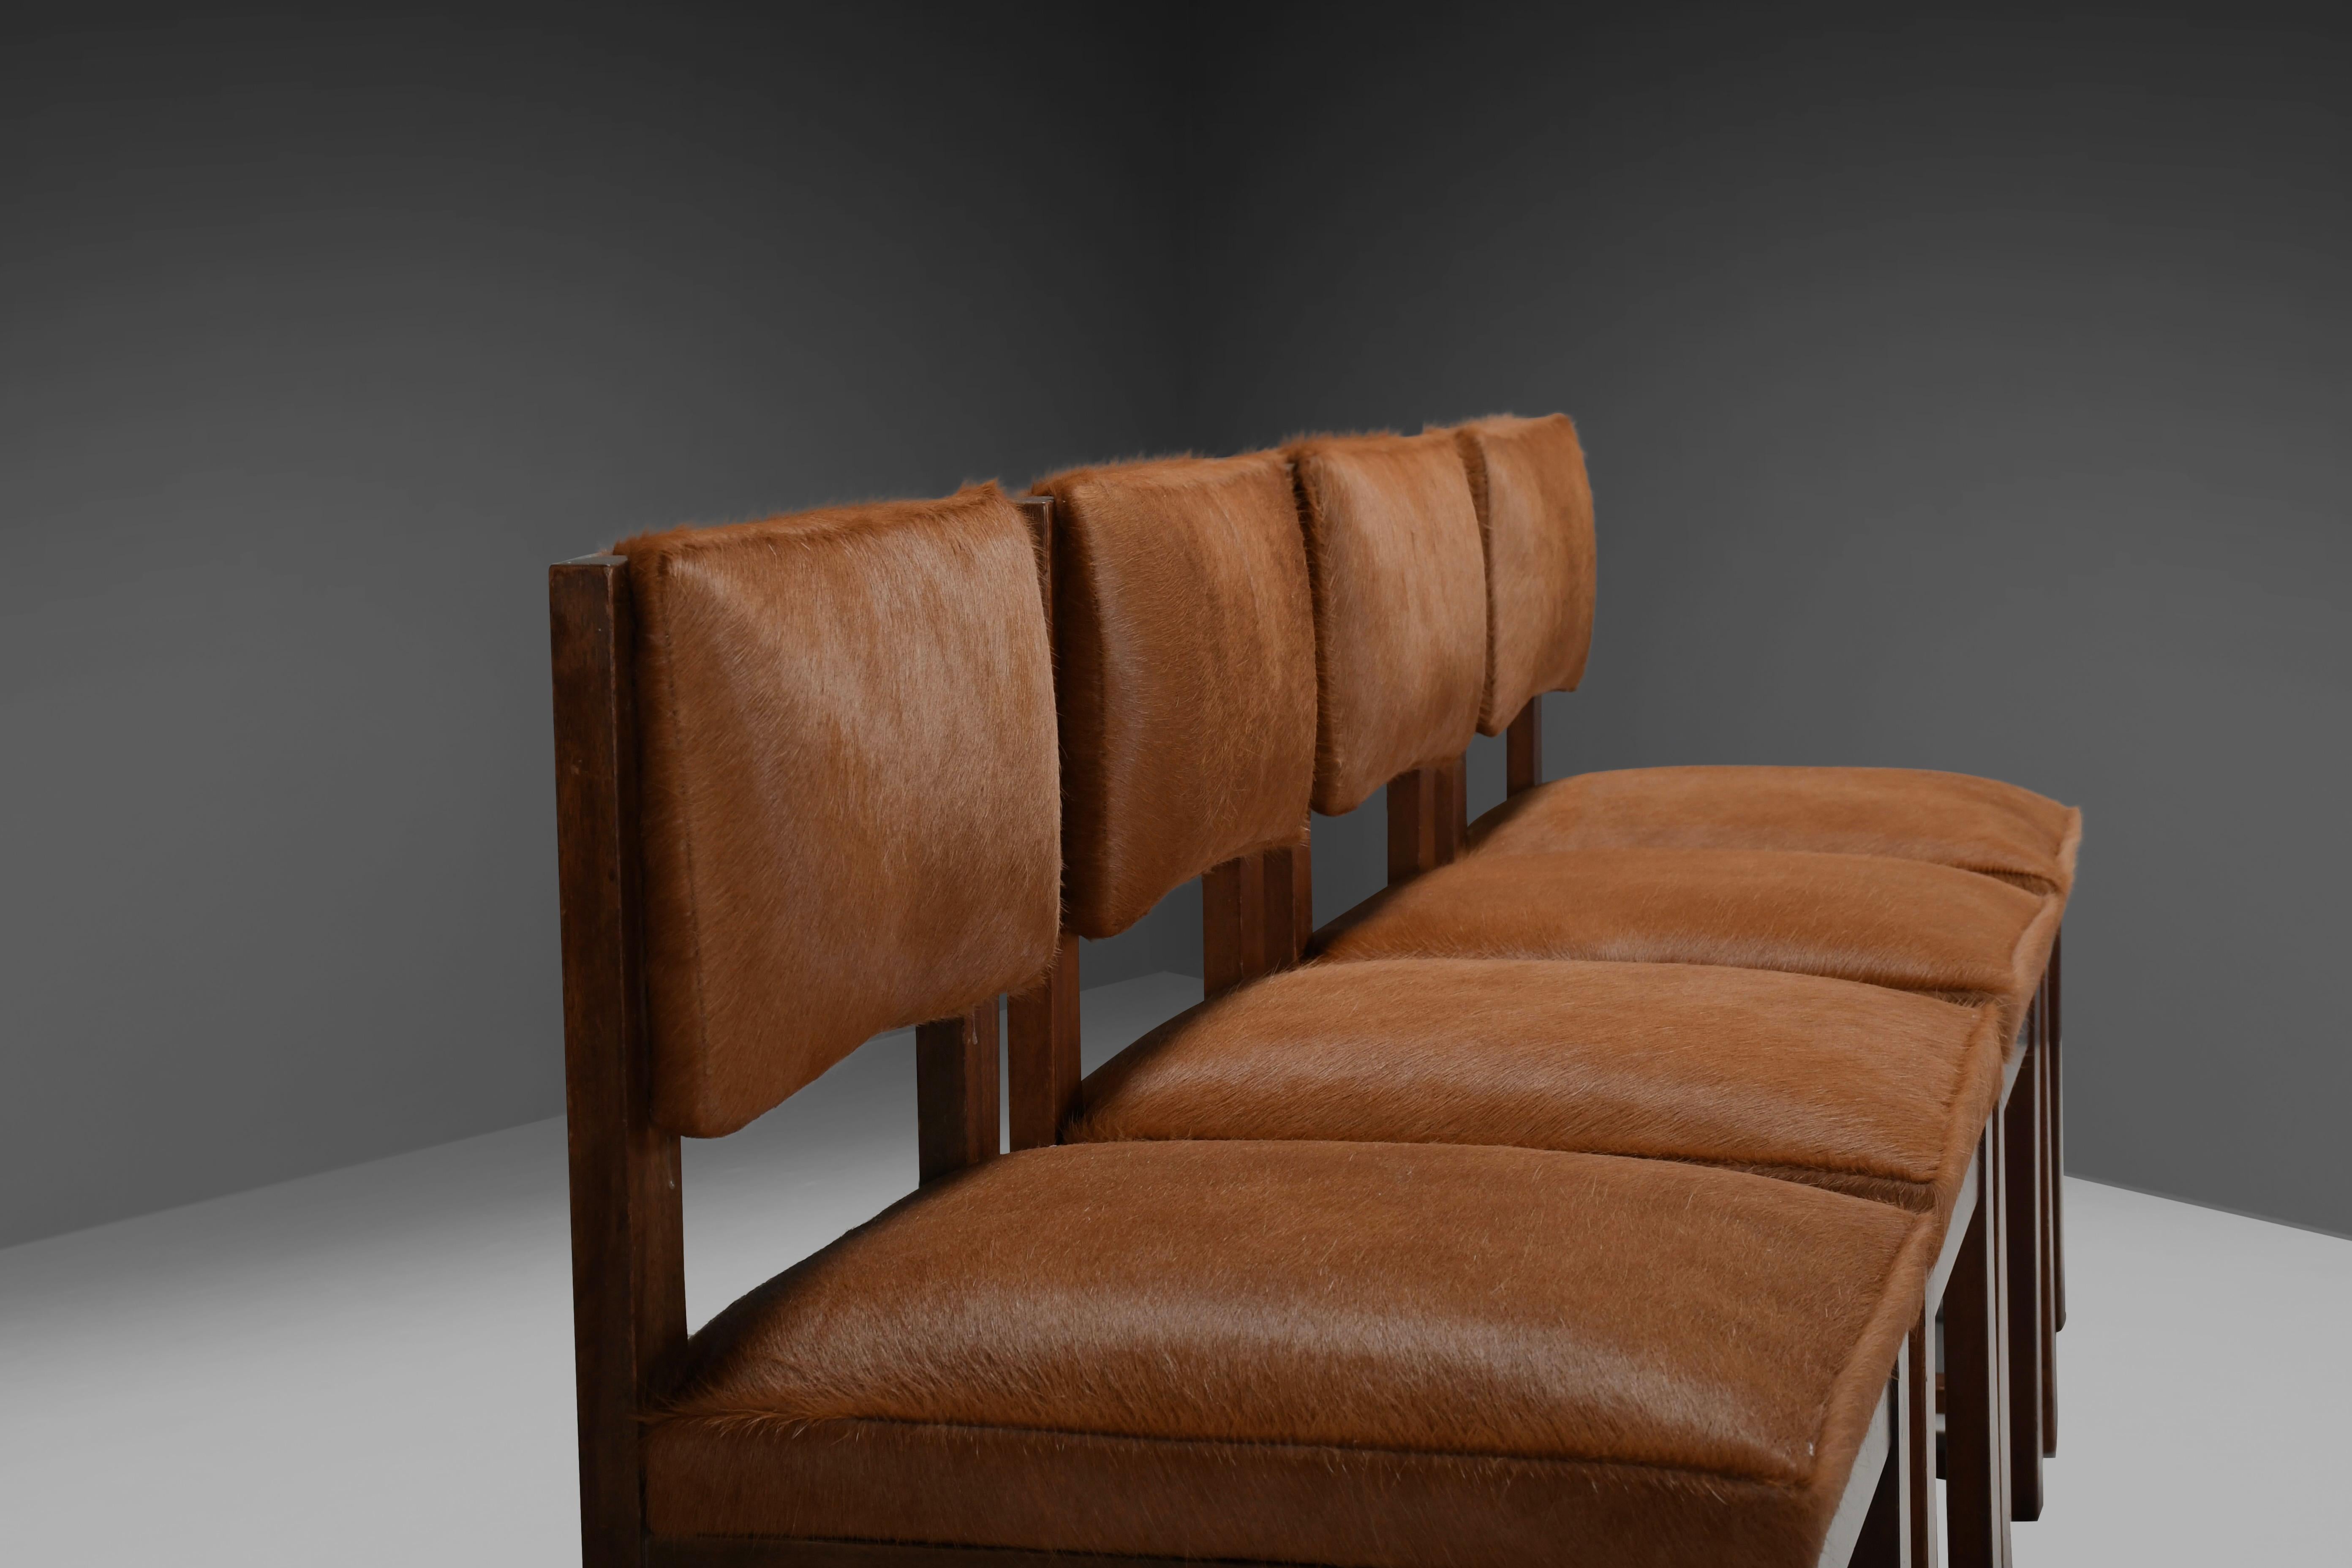 Dutch Set of 4 Minimalist Art Deco Dining Chairs in Cowhide, Netherlands, 1940s  For Sale